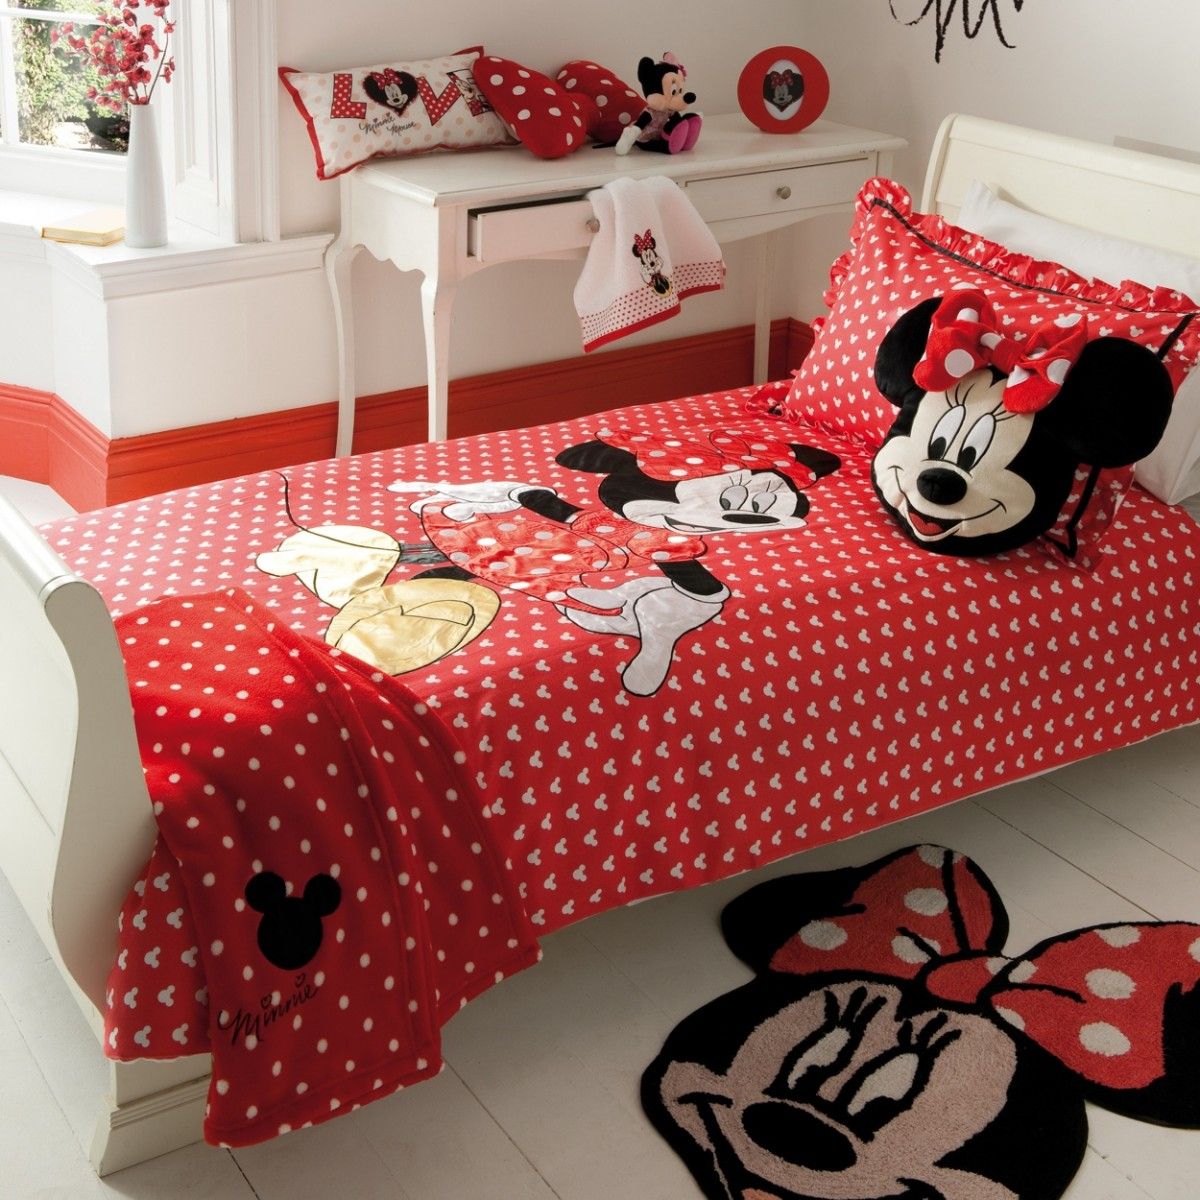 Brave Minnie Mouse bedroom